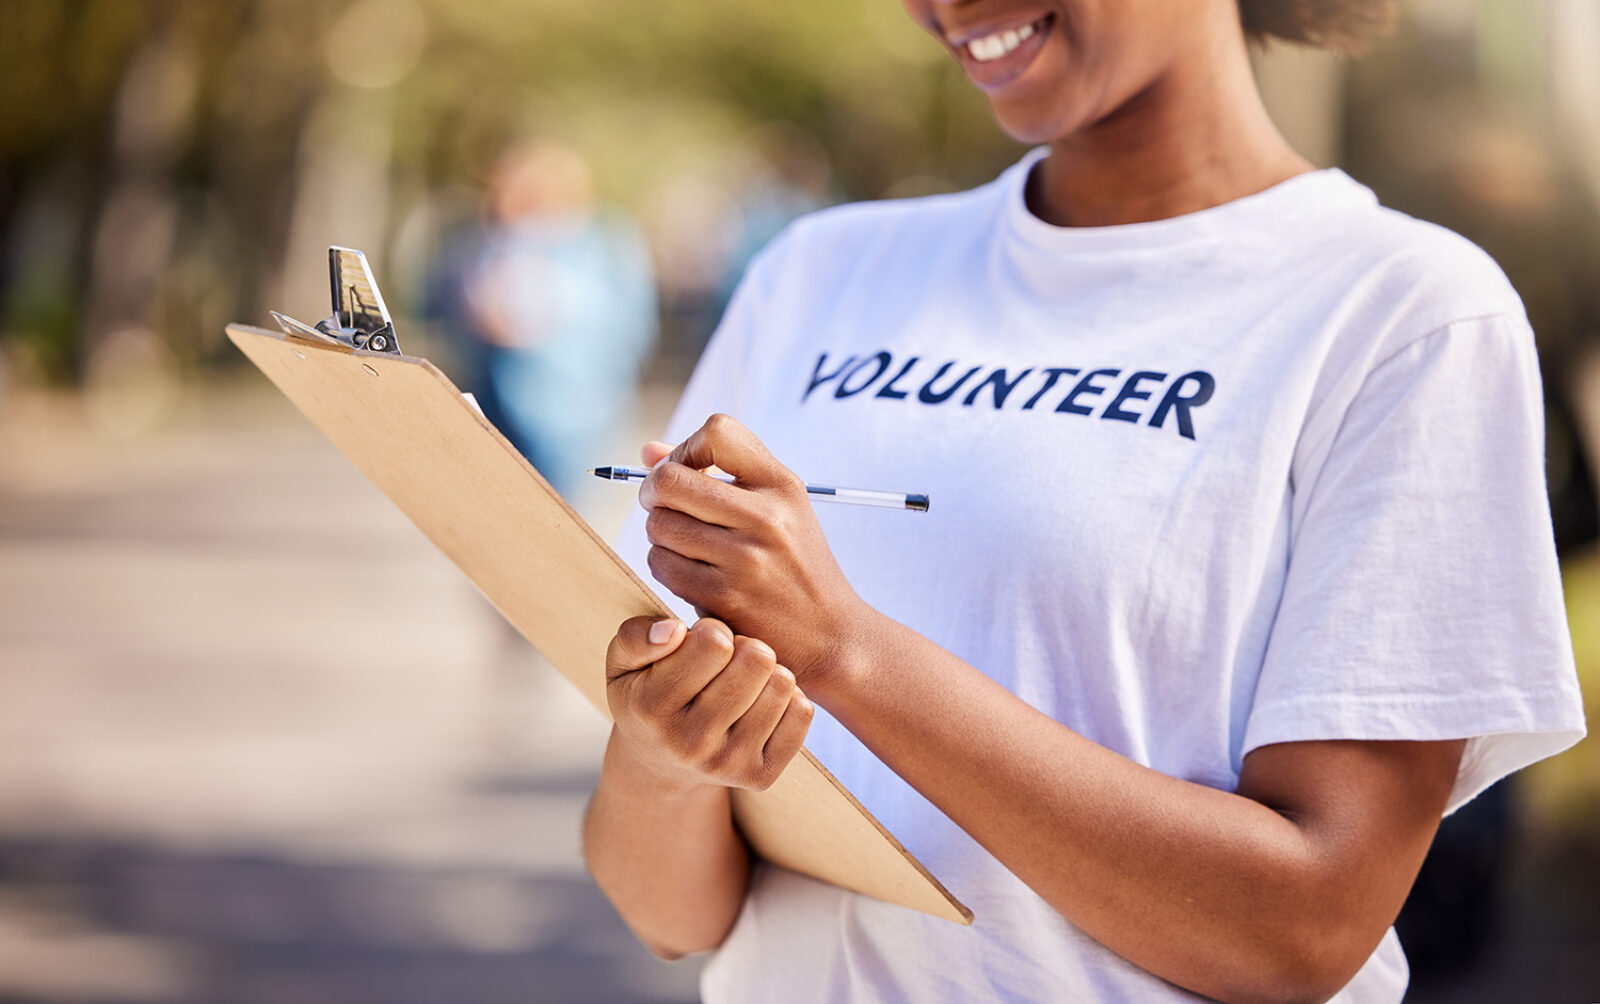 Volunteer to Represent Riverside at Community Events